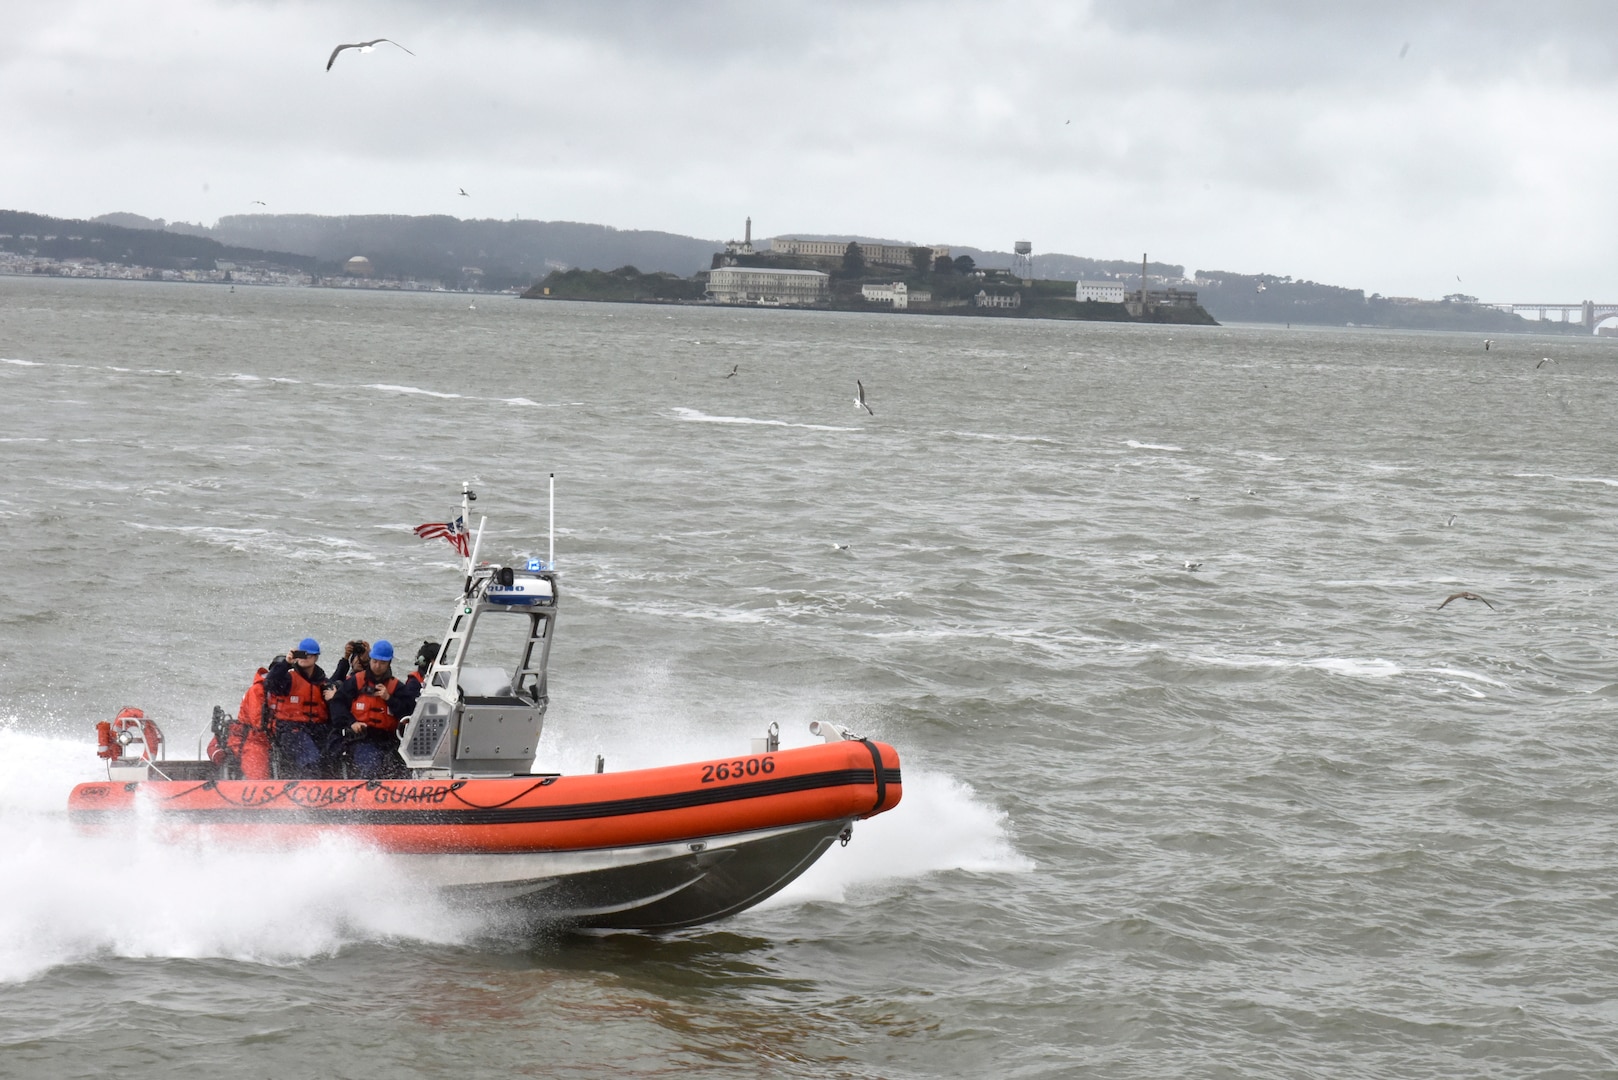 Crewmembers stationed aboard the Coast Guard Cutter Robert Ward, a Sentinel Class Fast Response Cutter, demonstrate the maneuverability of their 26-foot Over the Horizon IV Cutter Boat in San Francisco Bay, Feb. 28, 2019. The Robert Ward is the newest Coast Guard cutter to be stationed in California and will provide additional resources to the Coast Guard in emergency response, maritime smuggling, marine safety, environmental protection, search and rescue, and port security.